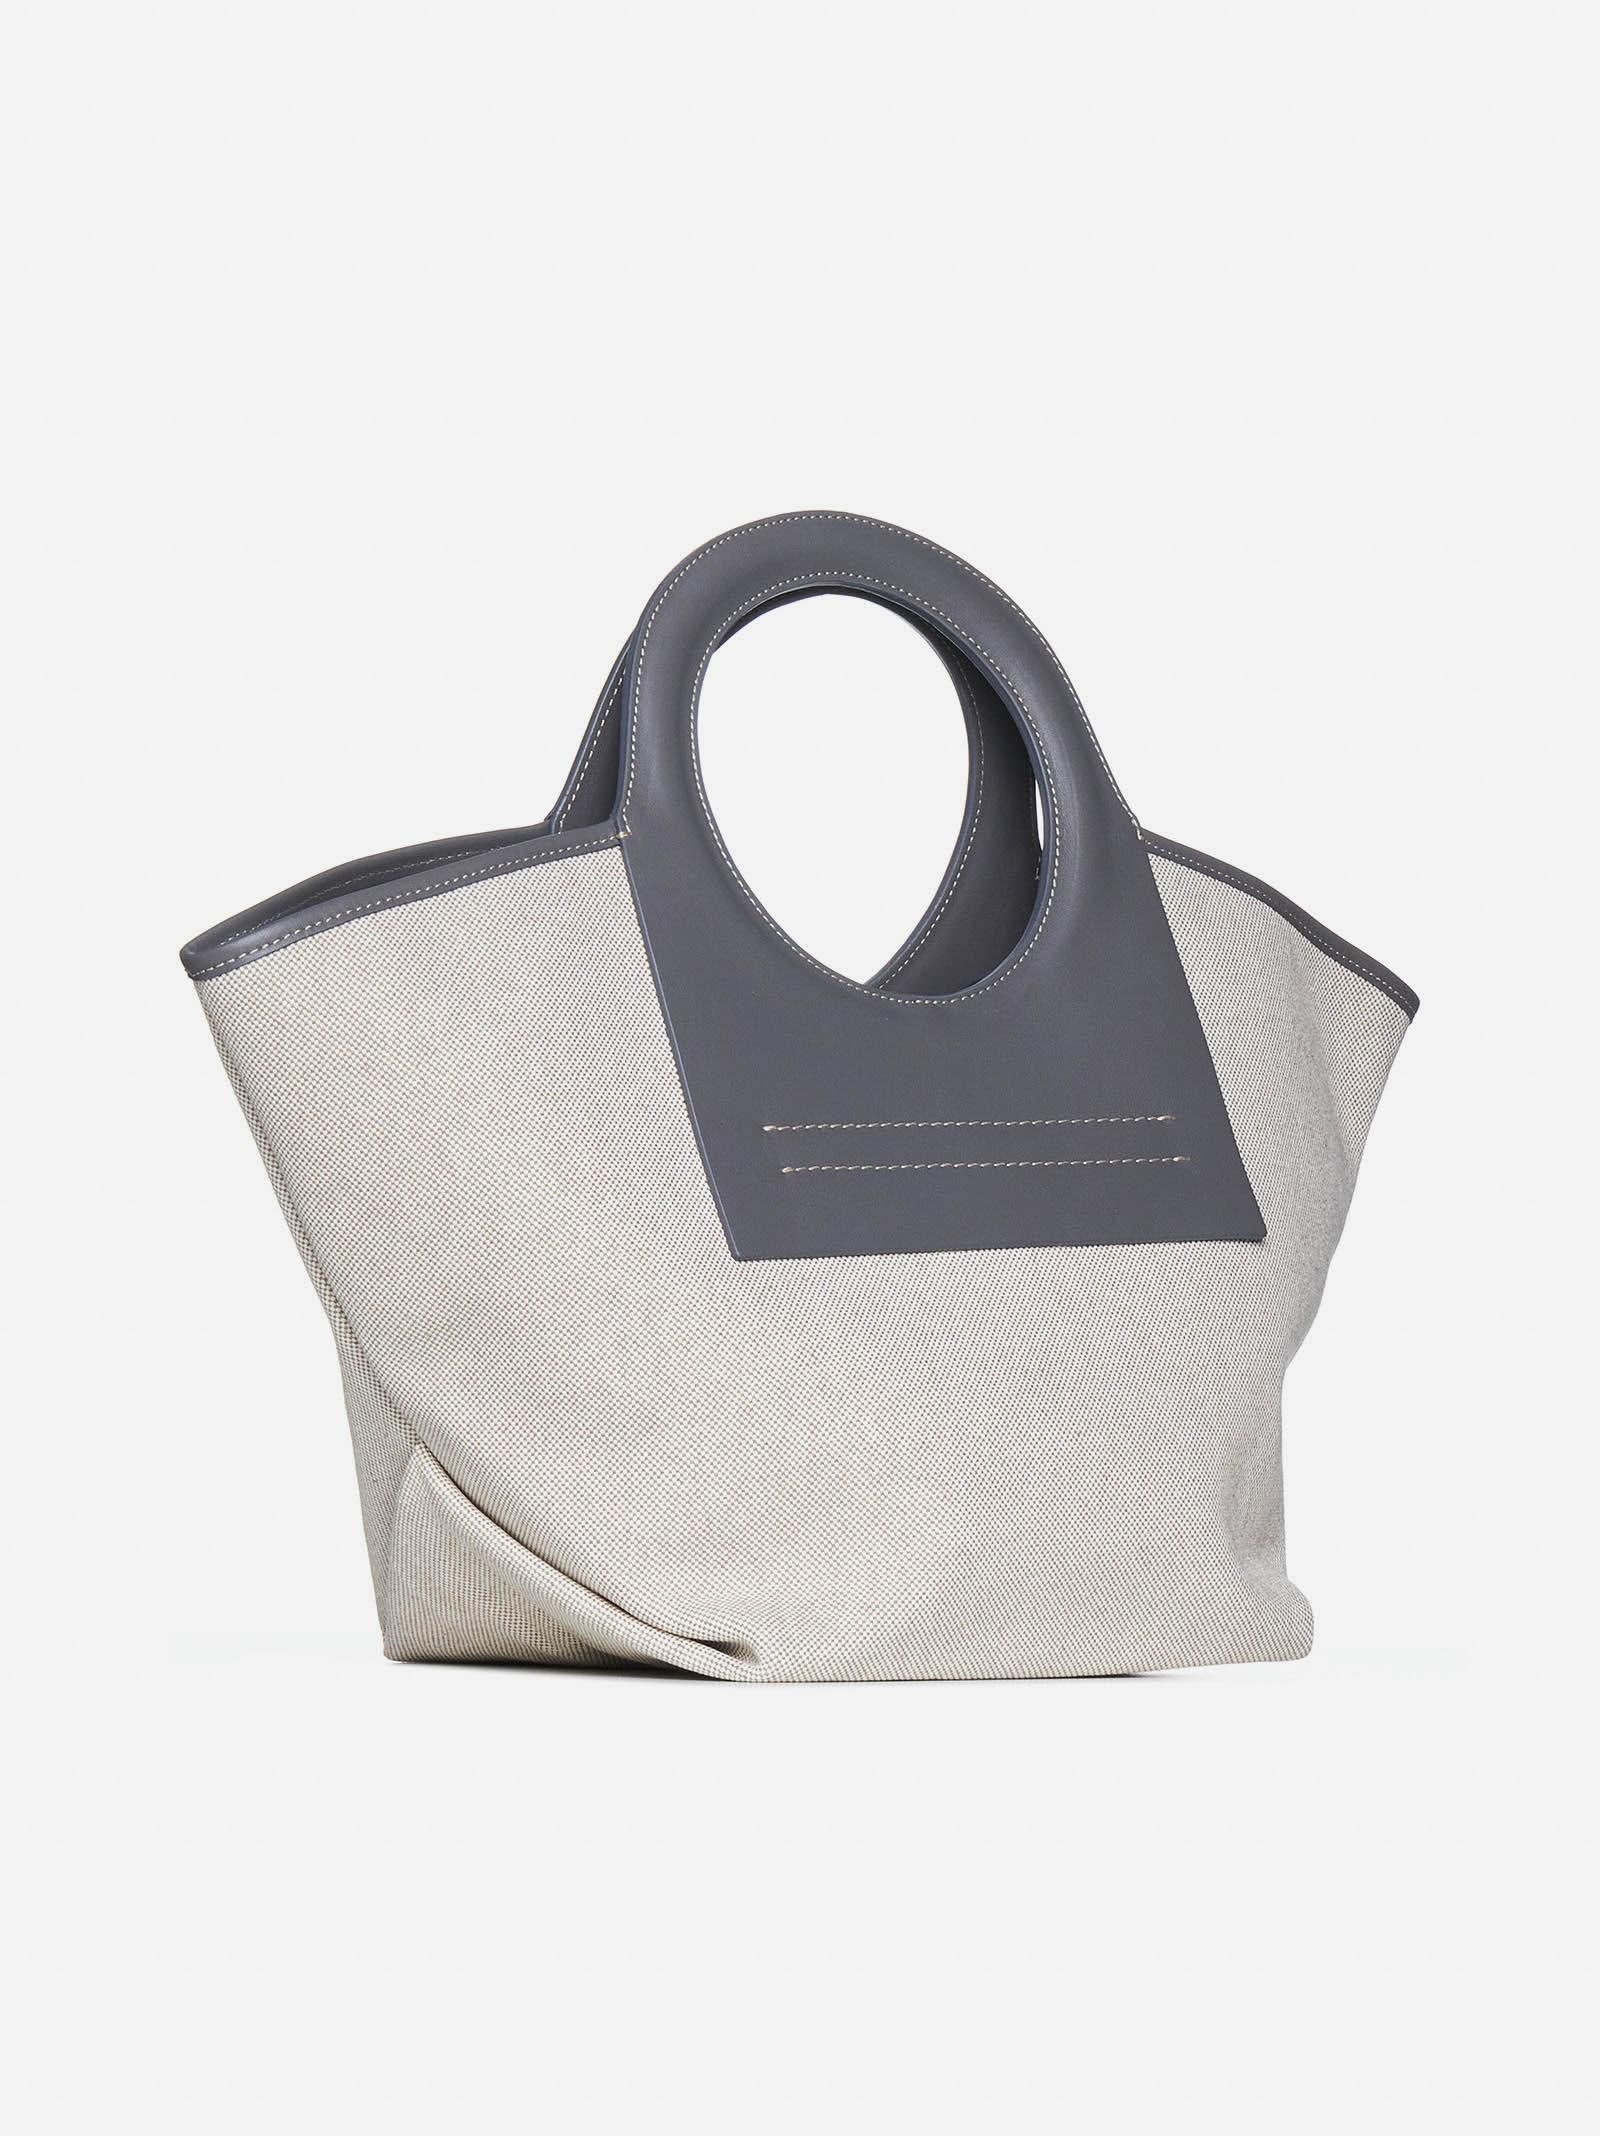 Cala small leather-trimmed canvas tote bag by Hereu